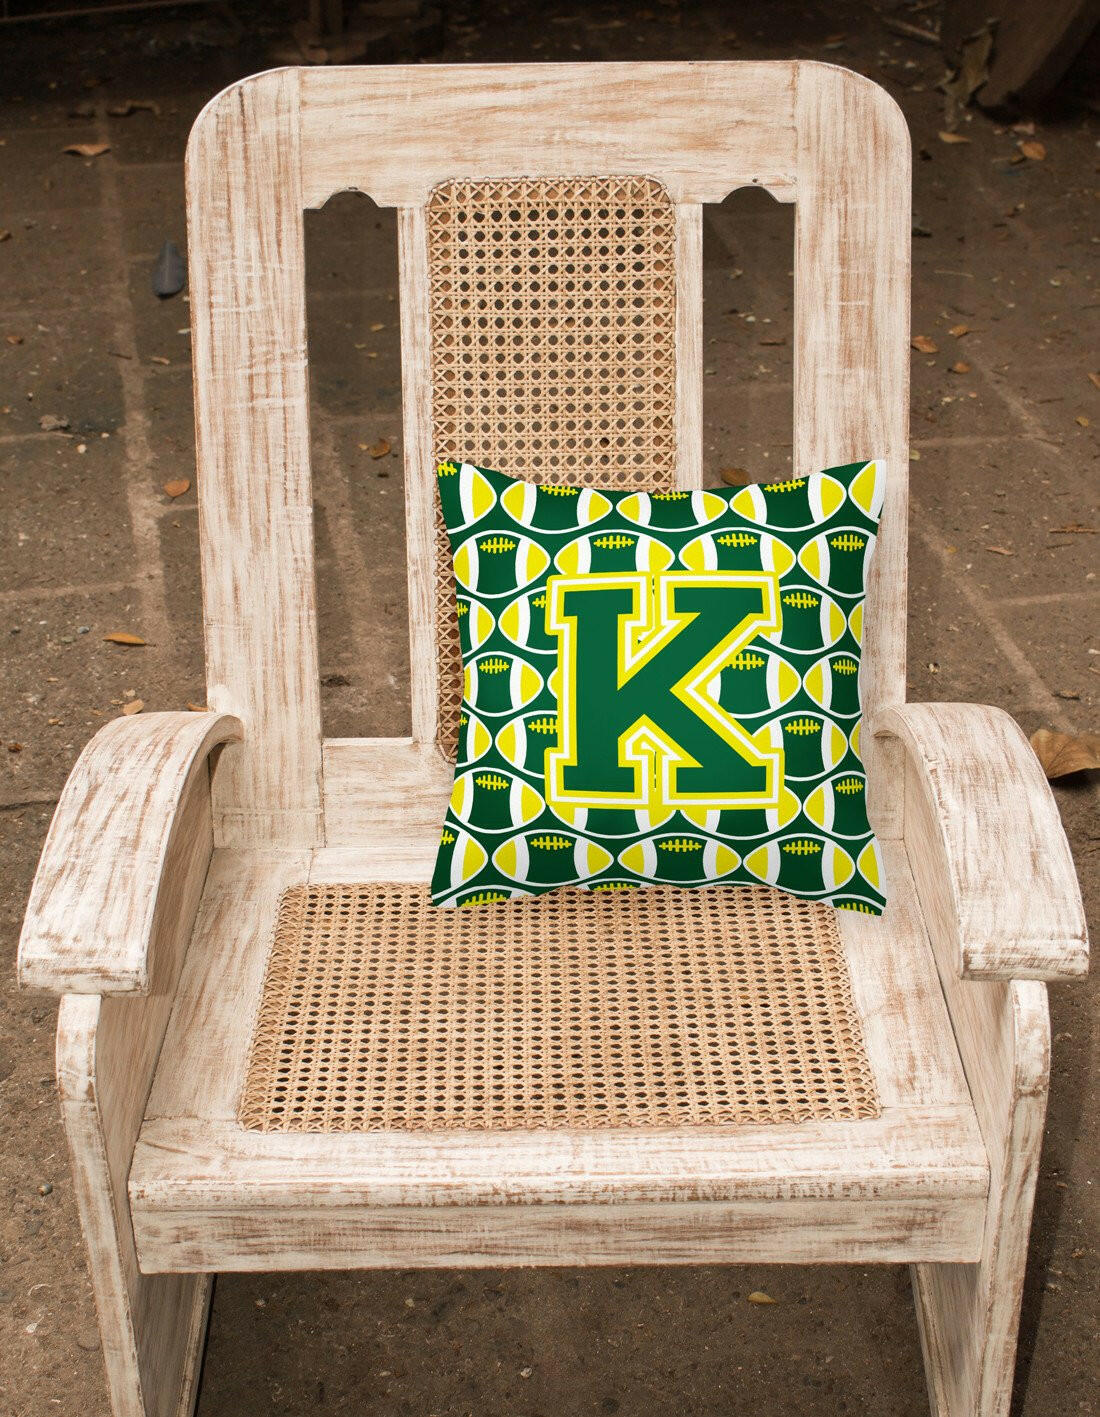 Letter K Football Green and Yellow Fabric Decorative Pillow CJ1075-KPW1414 by Caroline's Treasures